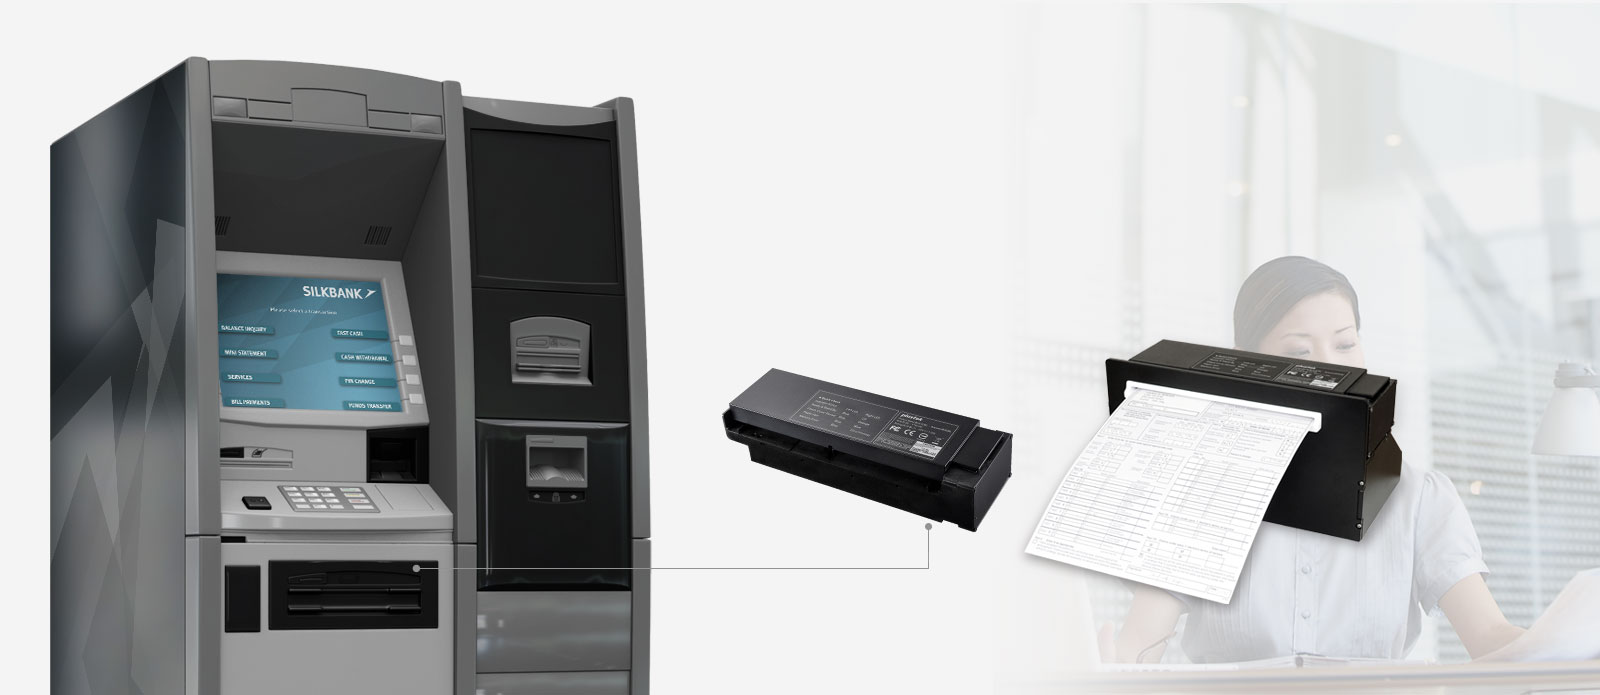 The VTM 300, a scan module that is easily integrated to kiosk or sercice desk. With no moving part and capable of ejecteing in both way it has been widely used in many industry, including: banking, healthcare, eduaction, and etc.